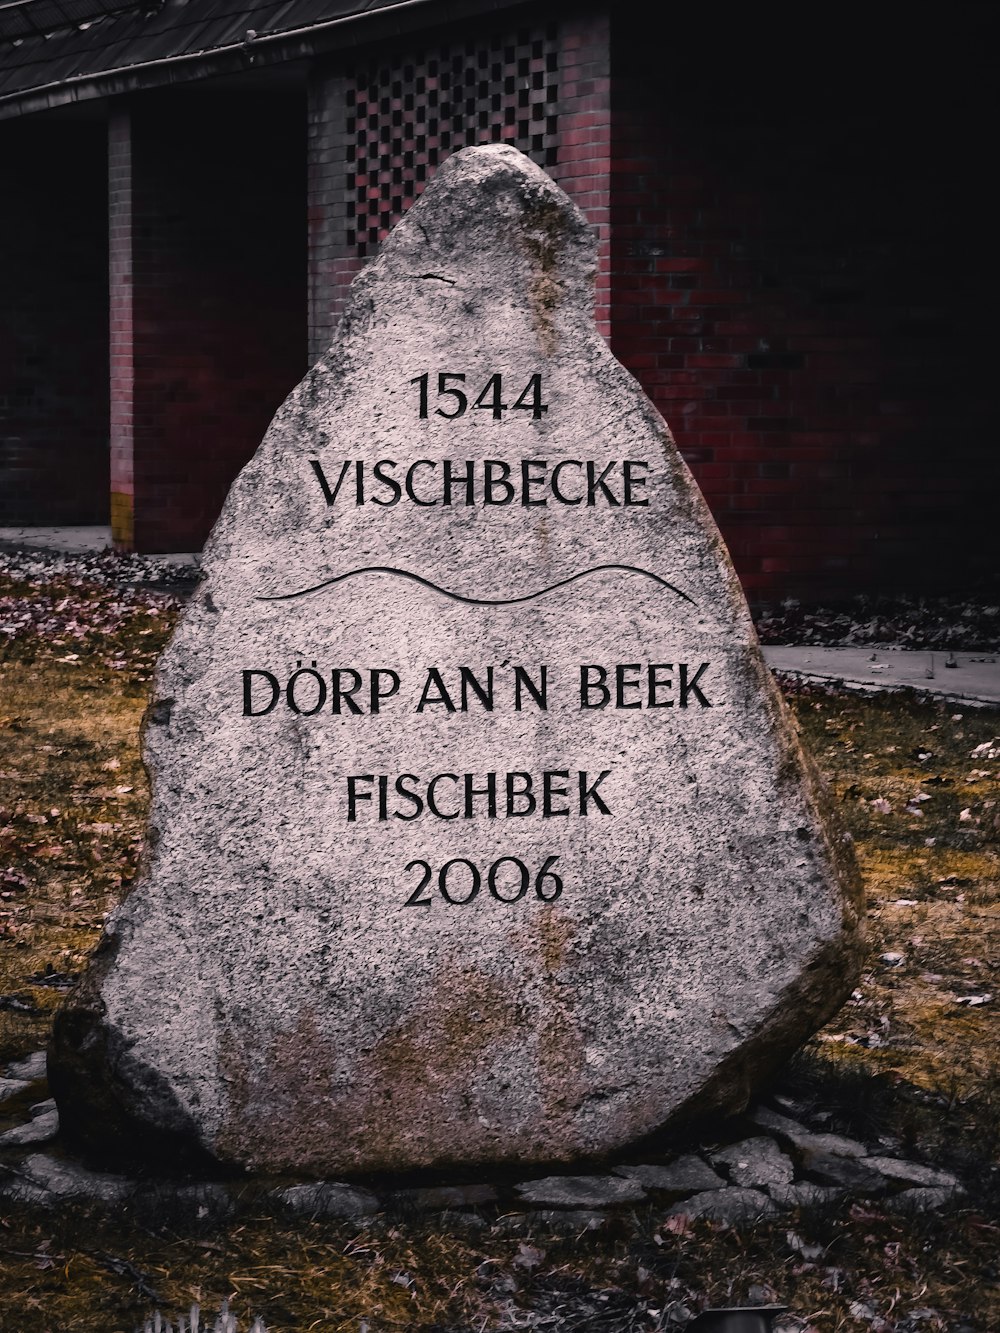 a large rock with a plaque on it